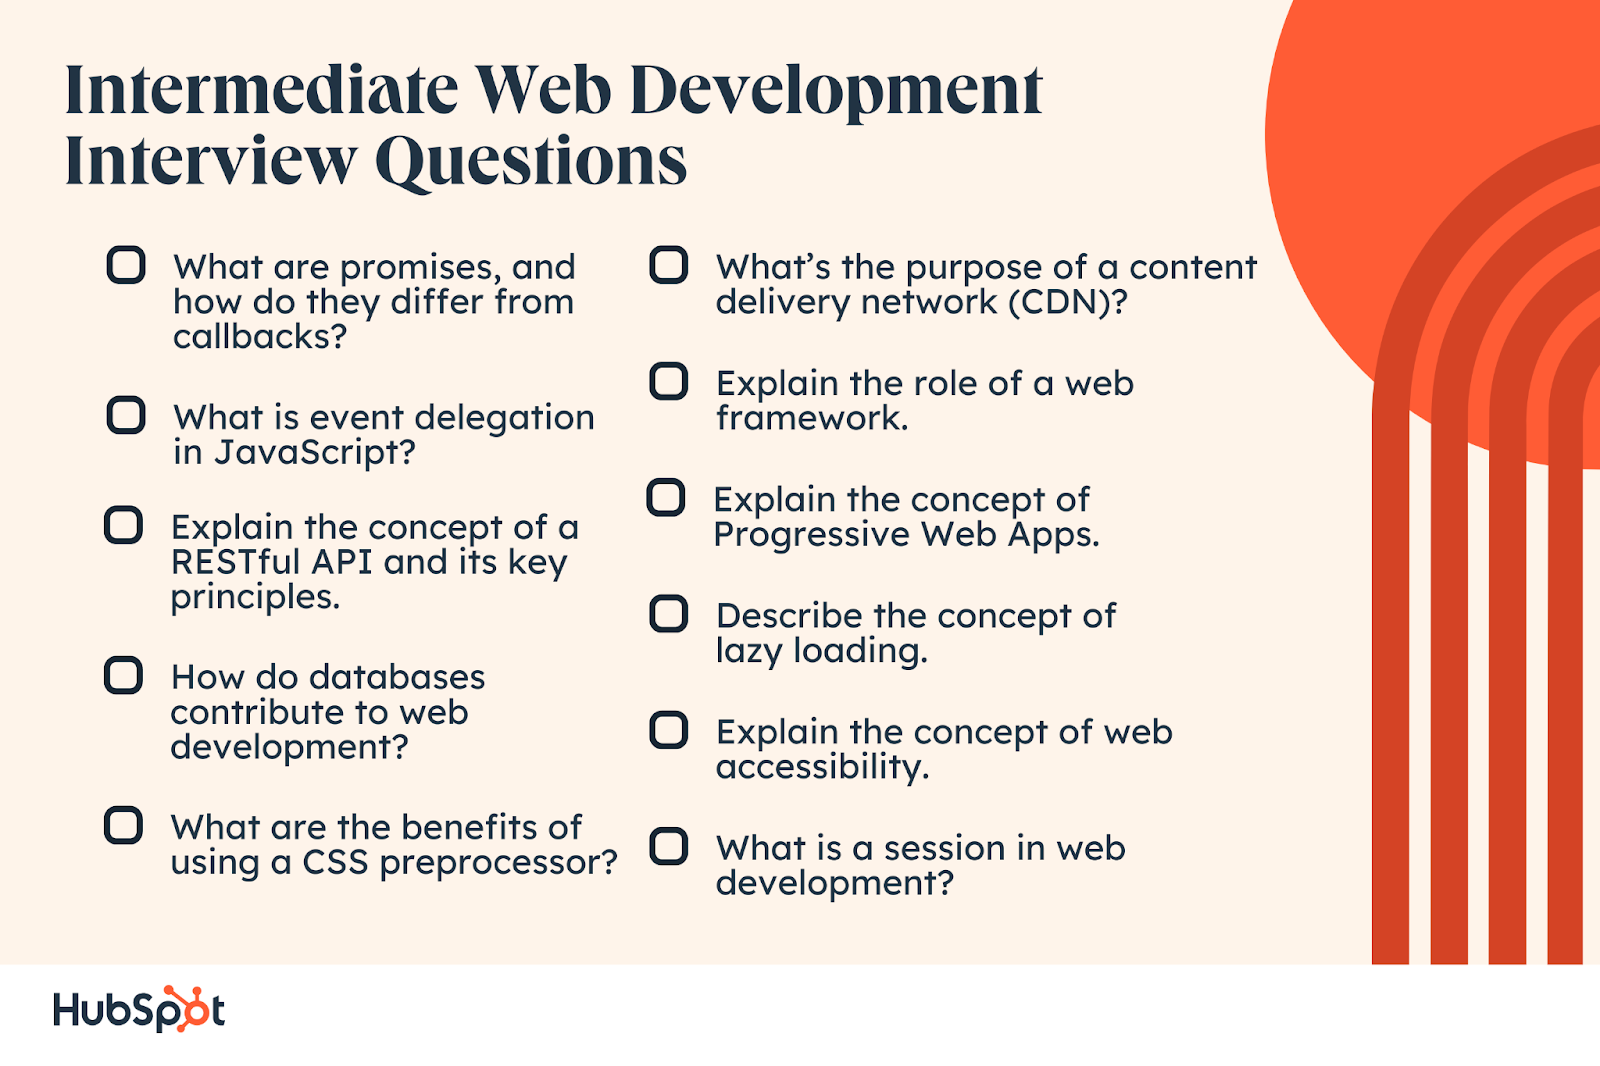 Intermediate Web Development Interview Questions. What are promises, and how do they differ from callbacks? Explain the concept of a RESTful API and its key principles. How do databases contribute to web development? What is event delegation in JavaScript? What are the benefits of using a CSS preprocessor? What’s the purpose of a content delivery network (CDN)? Explain the role of a web framework. Describe the concept of lazy loading. Explain the concept of web accessibility. What is a session in web development? Explain the concept of Progressive Web Apps.